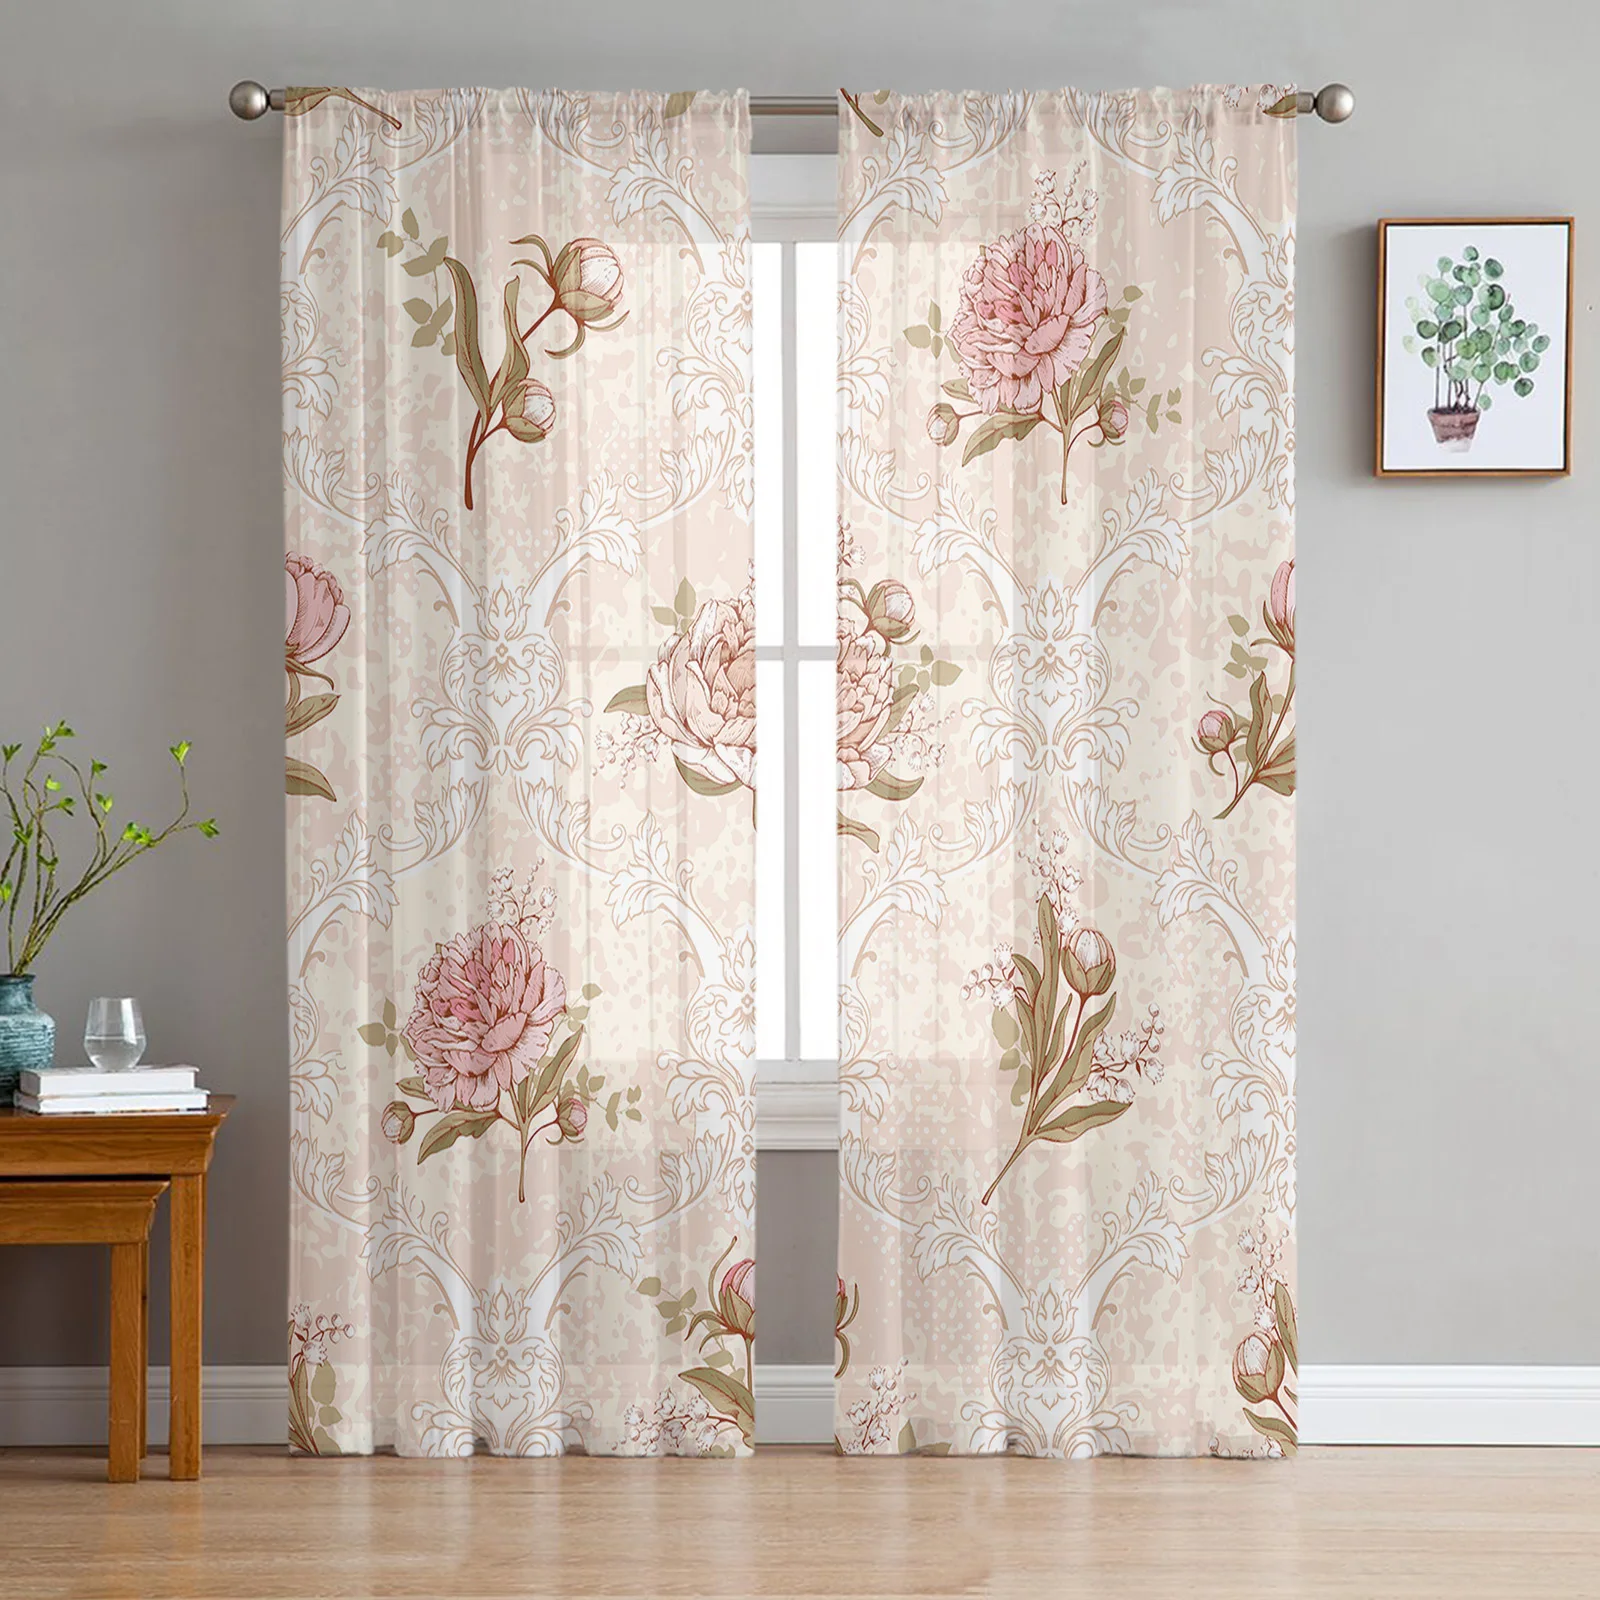 

Dahlia Flower Leaves Retro Tulle Curtains for Living Room Bedroom Voile Sheer Curtain Window Home Decor Drapes